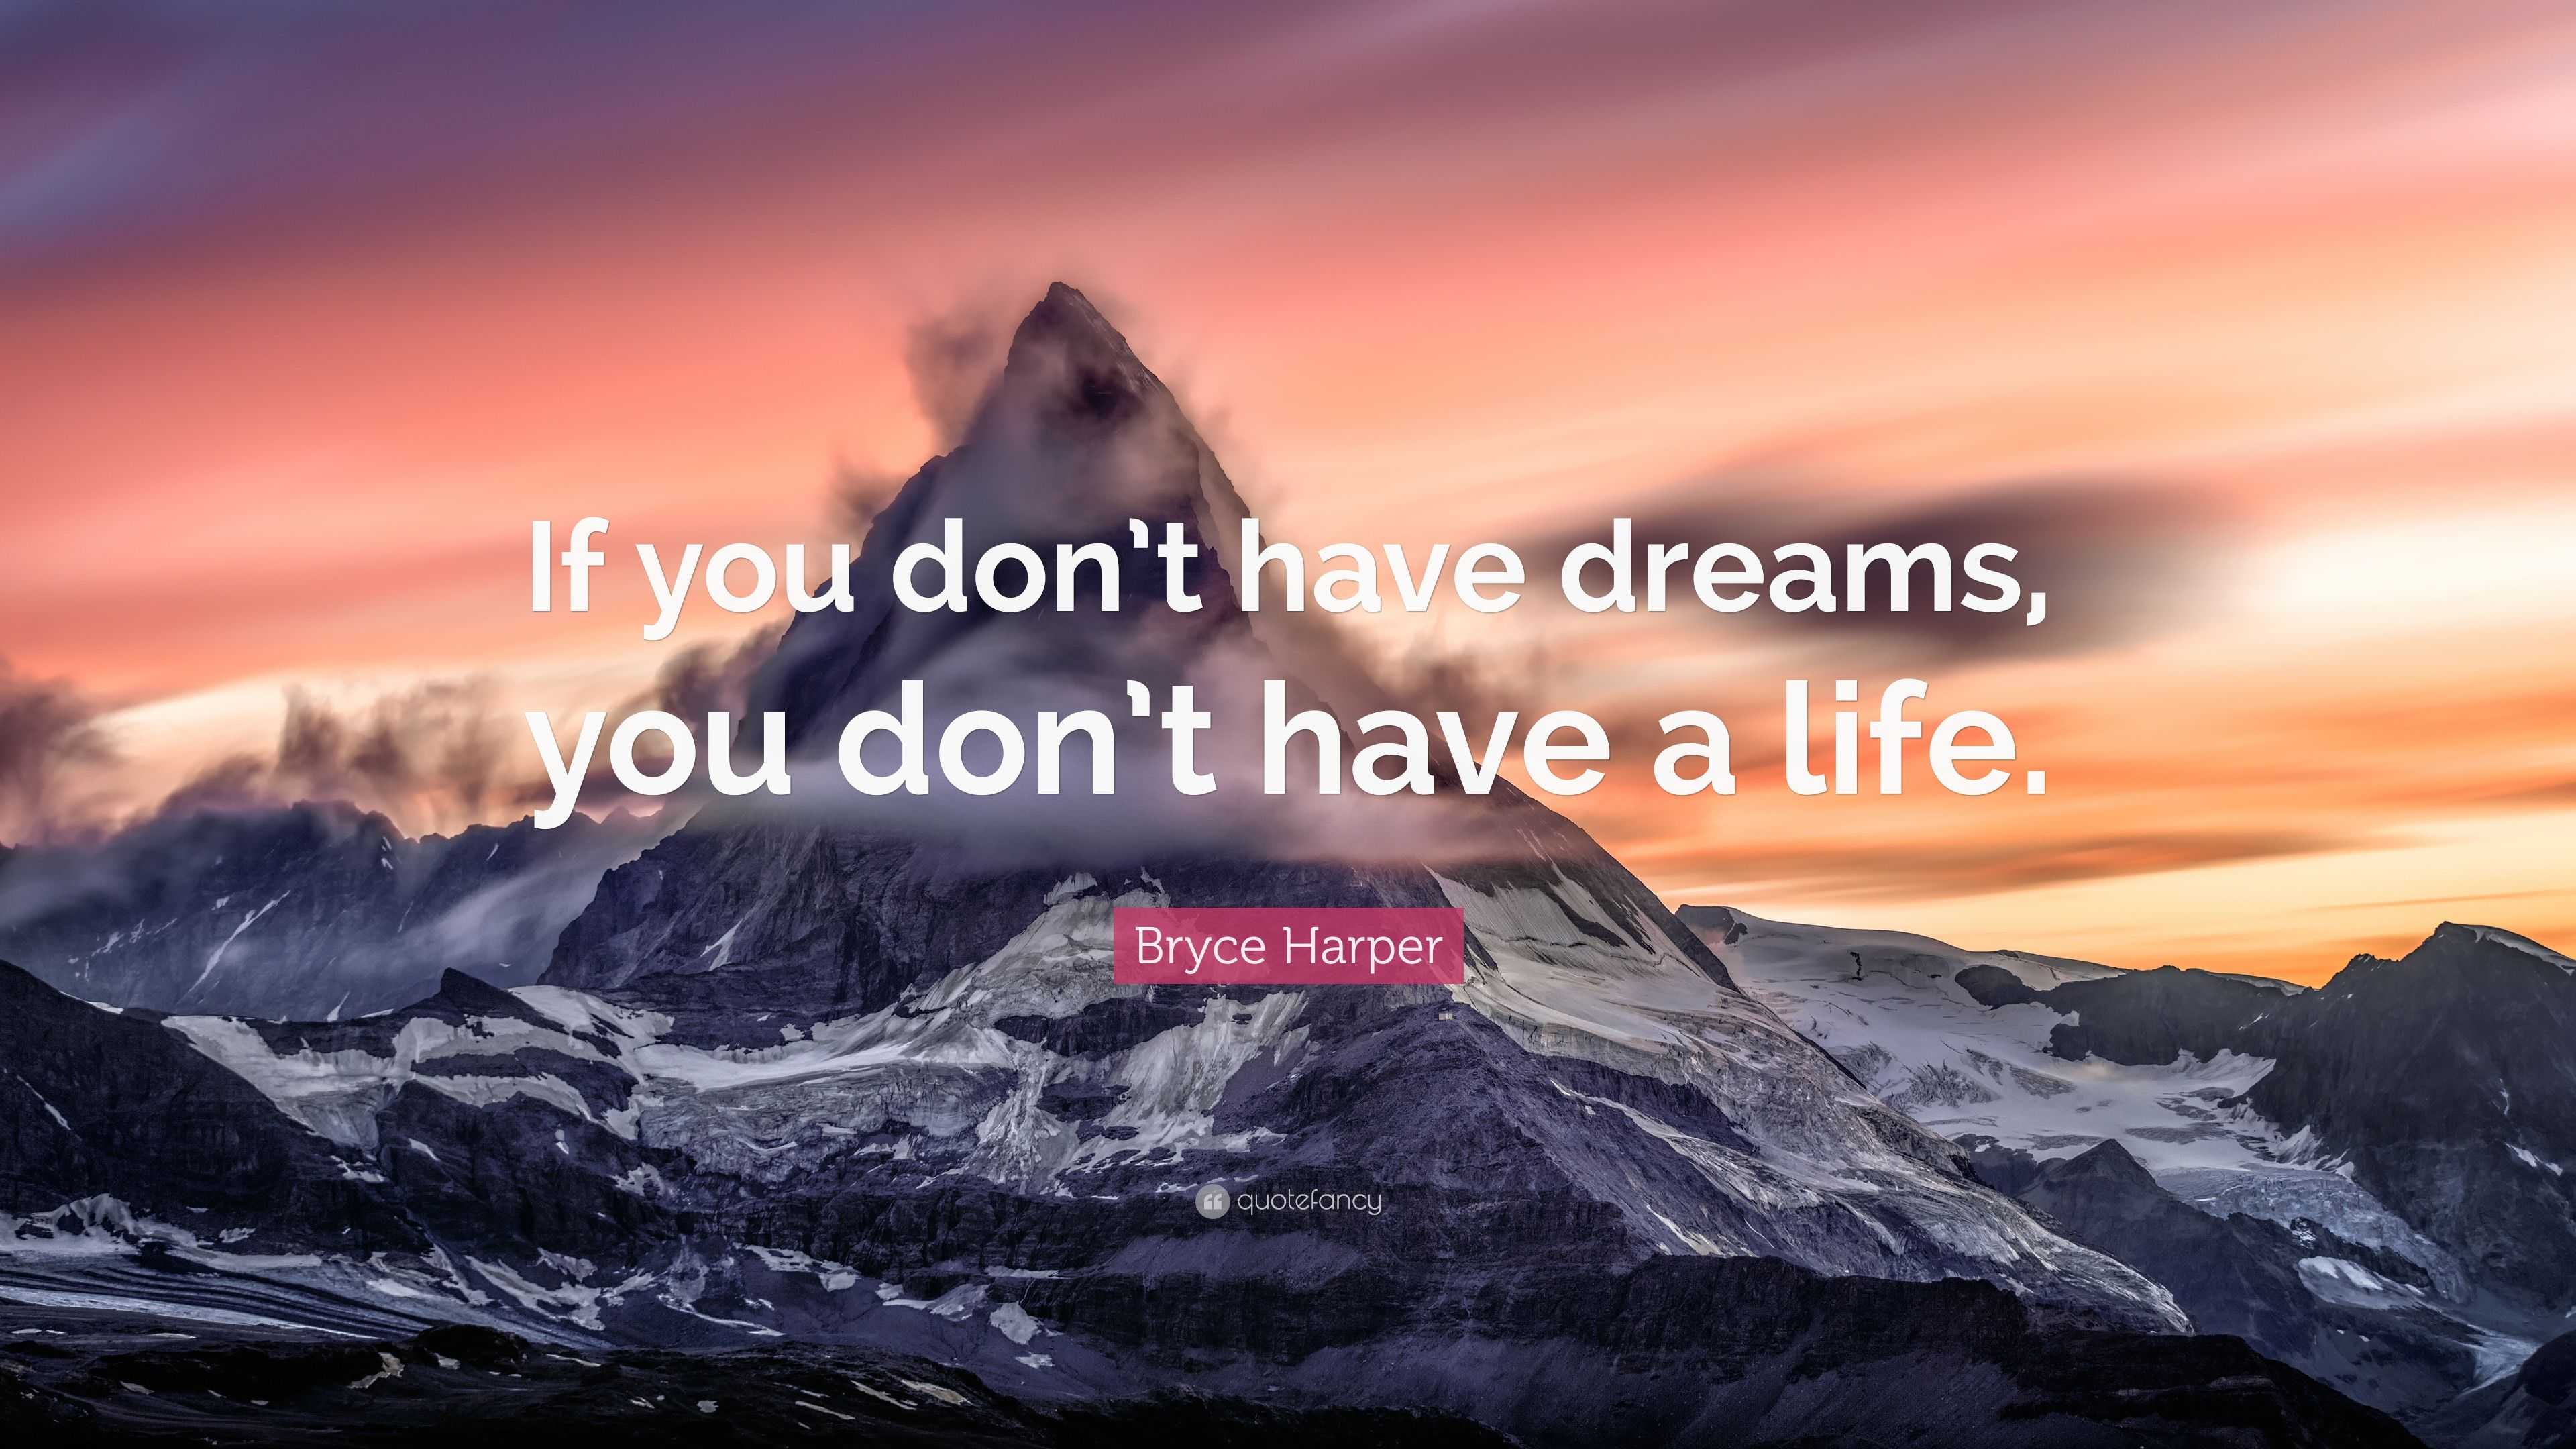 Bryce Harper Quote If You Don T Have Dreams You Don T Have A Life